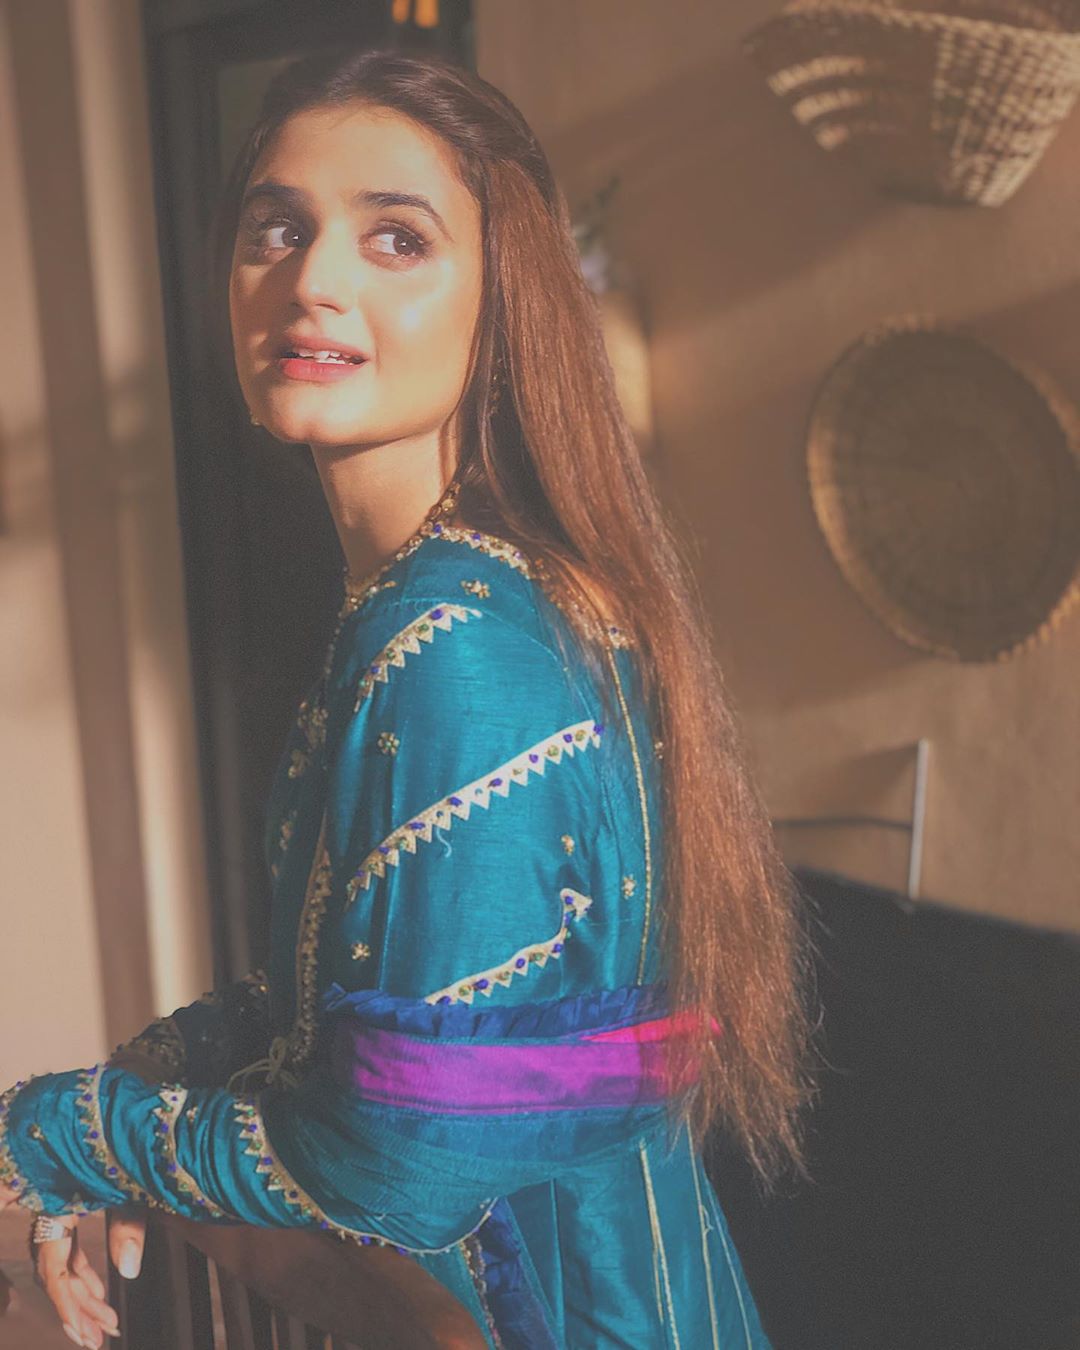 New Awesome Pictures of Actress Hira Mani